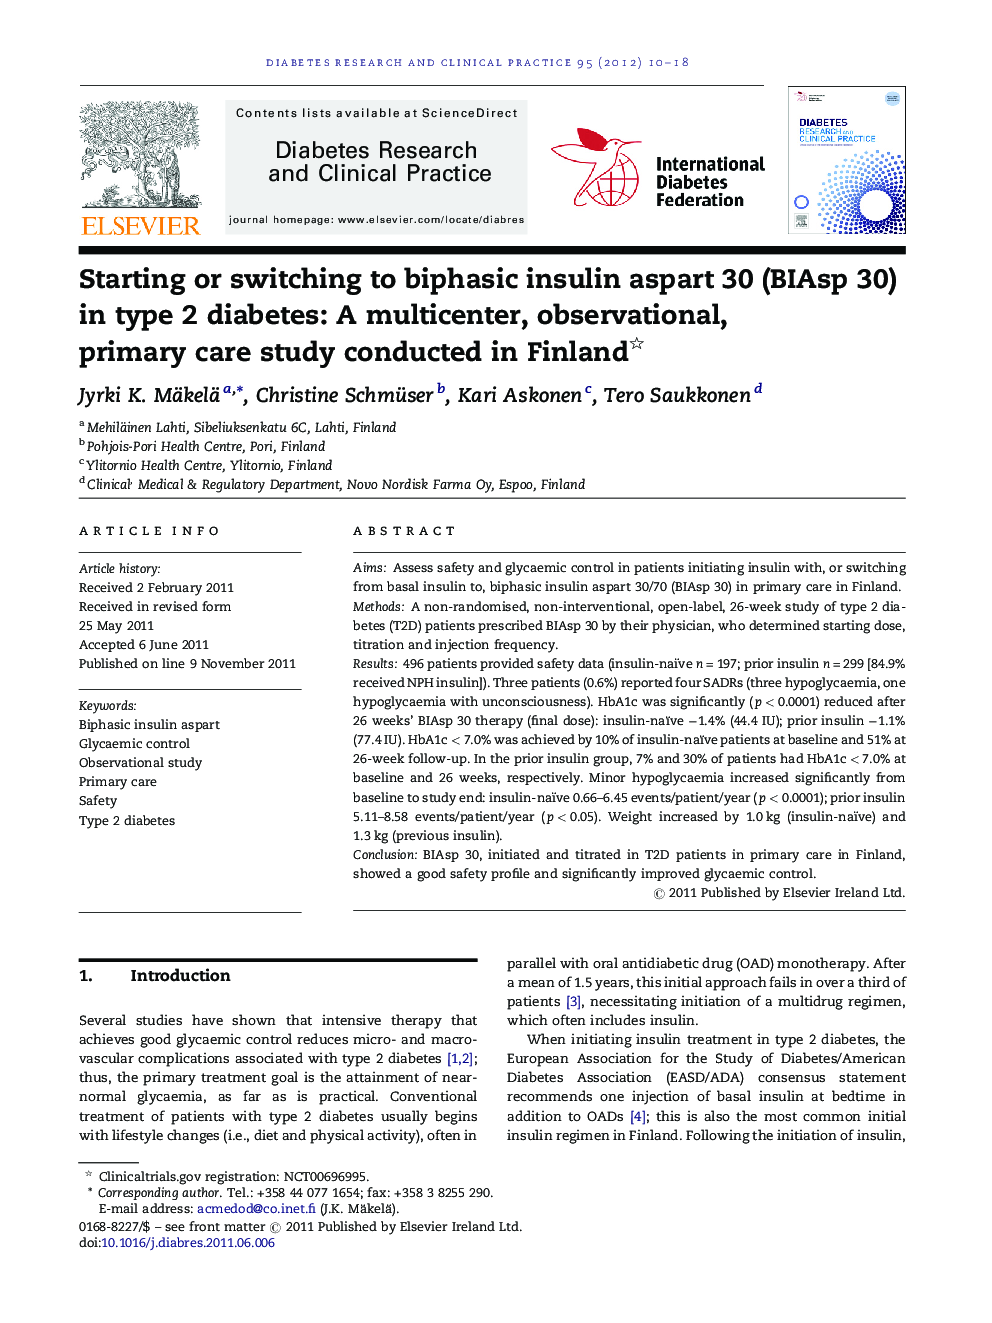 Starting or switching to biphasic insulin aspart 30 (BIAsp 30) in type 2 diabetes: A multicenter, observational, primary care study conducted in Finland 